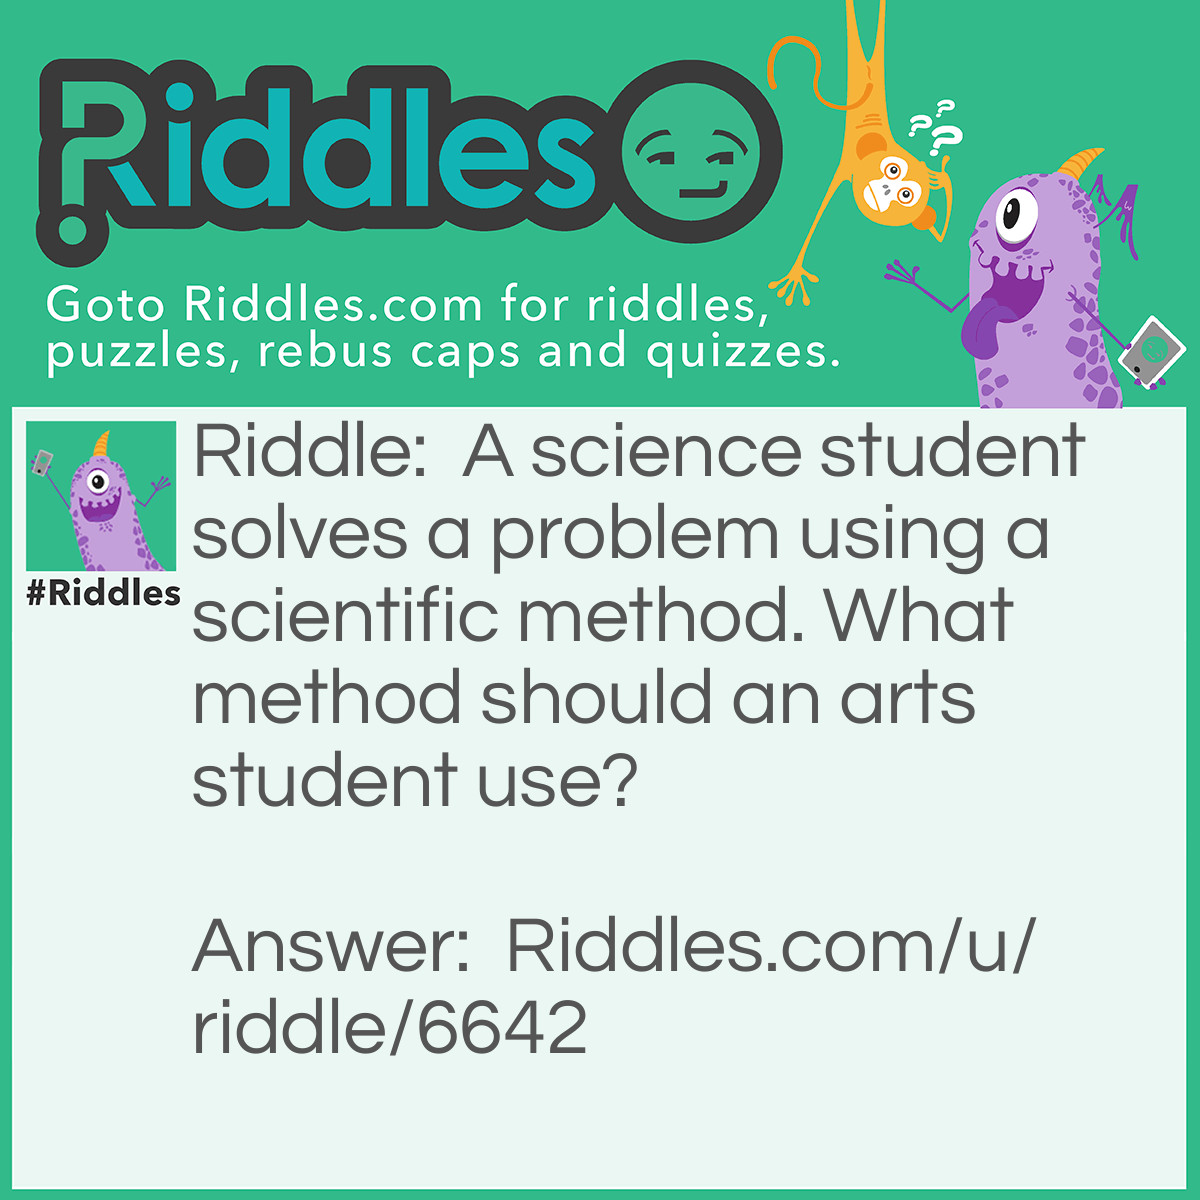 Riddle: A science student solves a problem using a scientific method. What method should an arts student use? Answer: Artificial method!